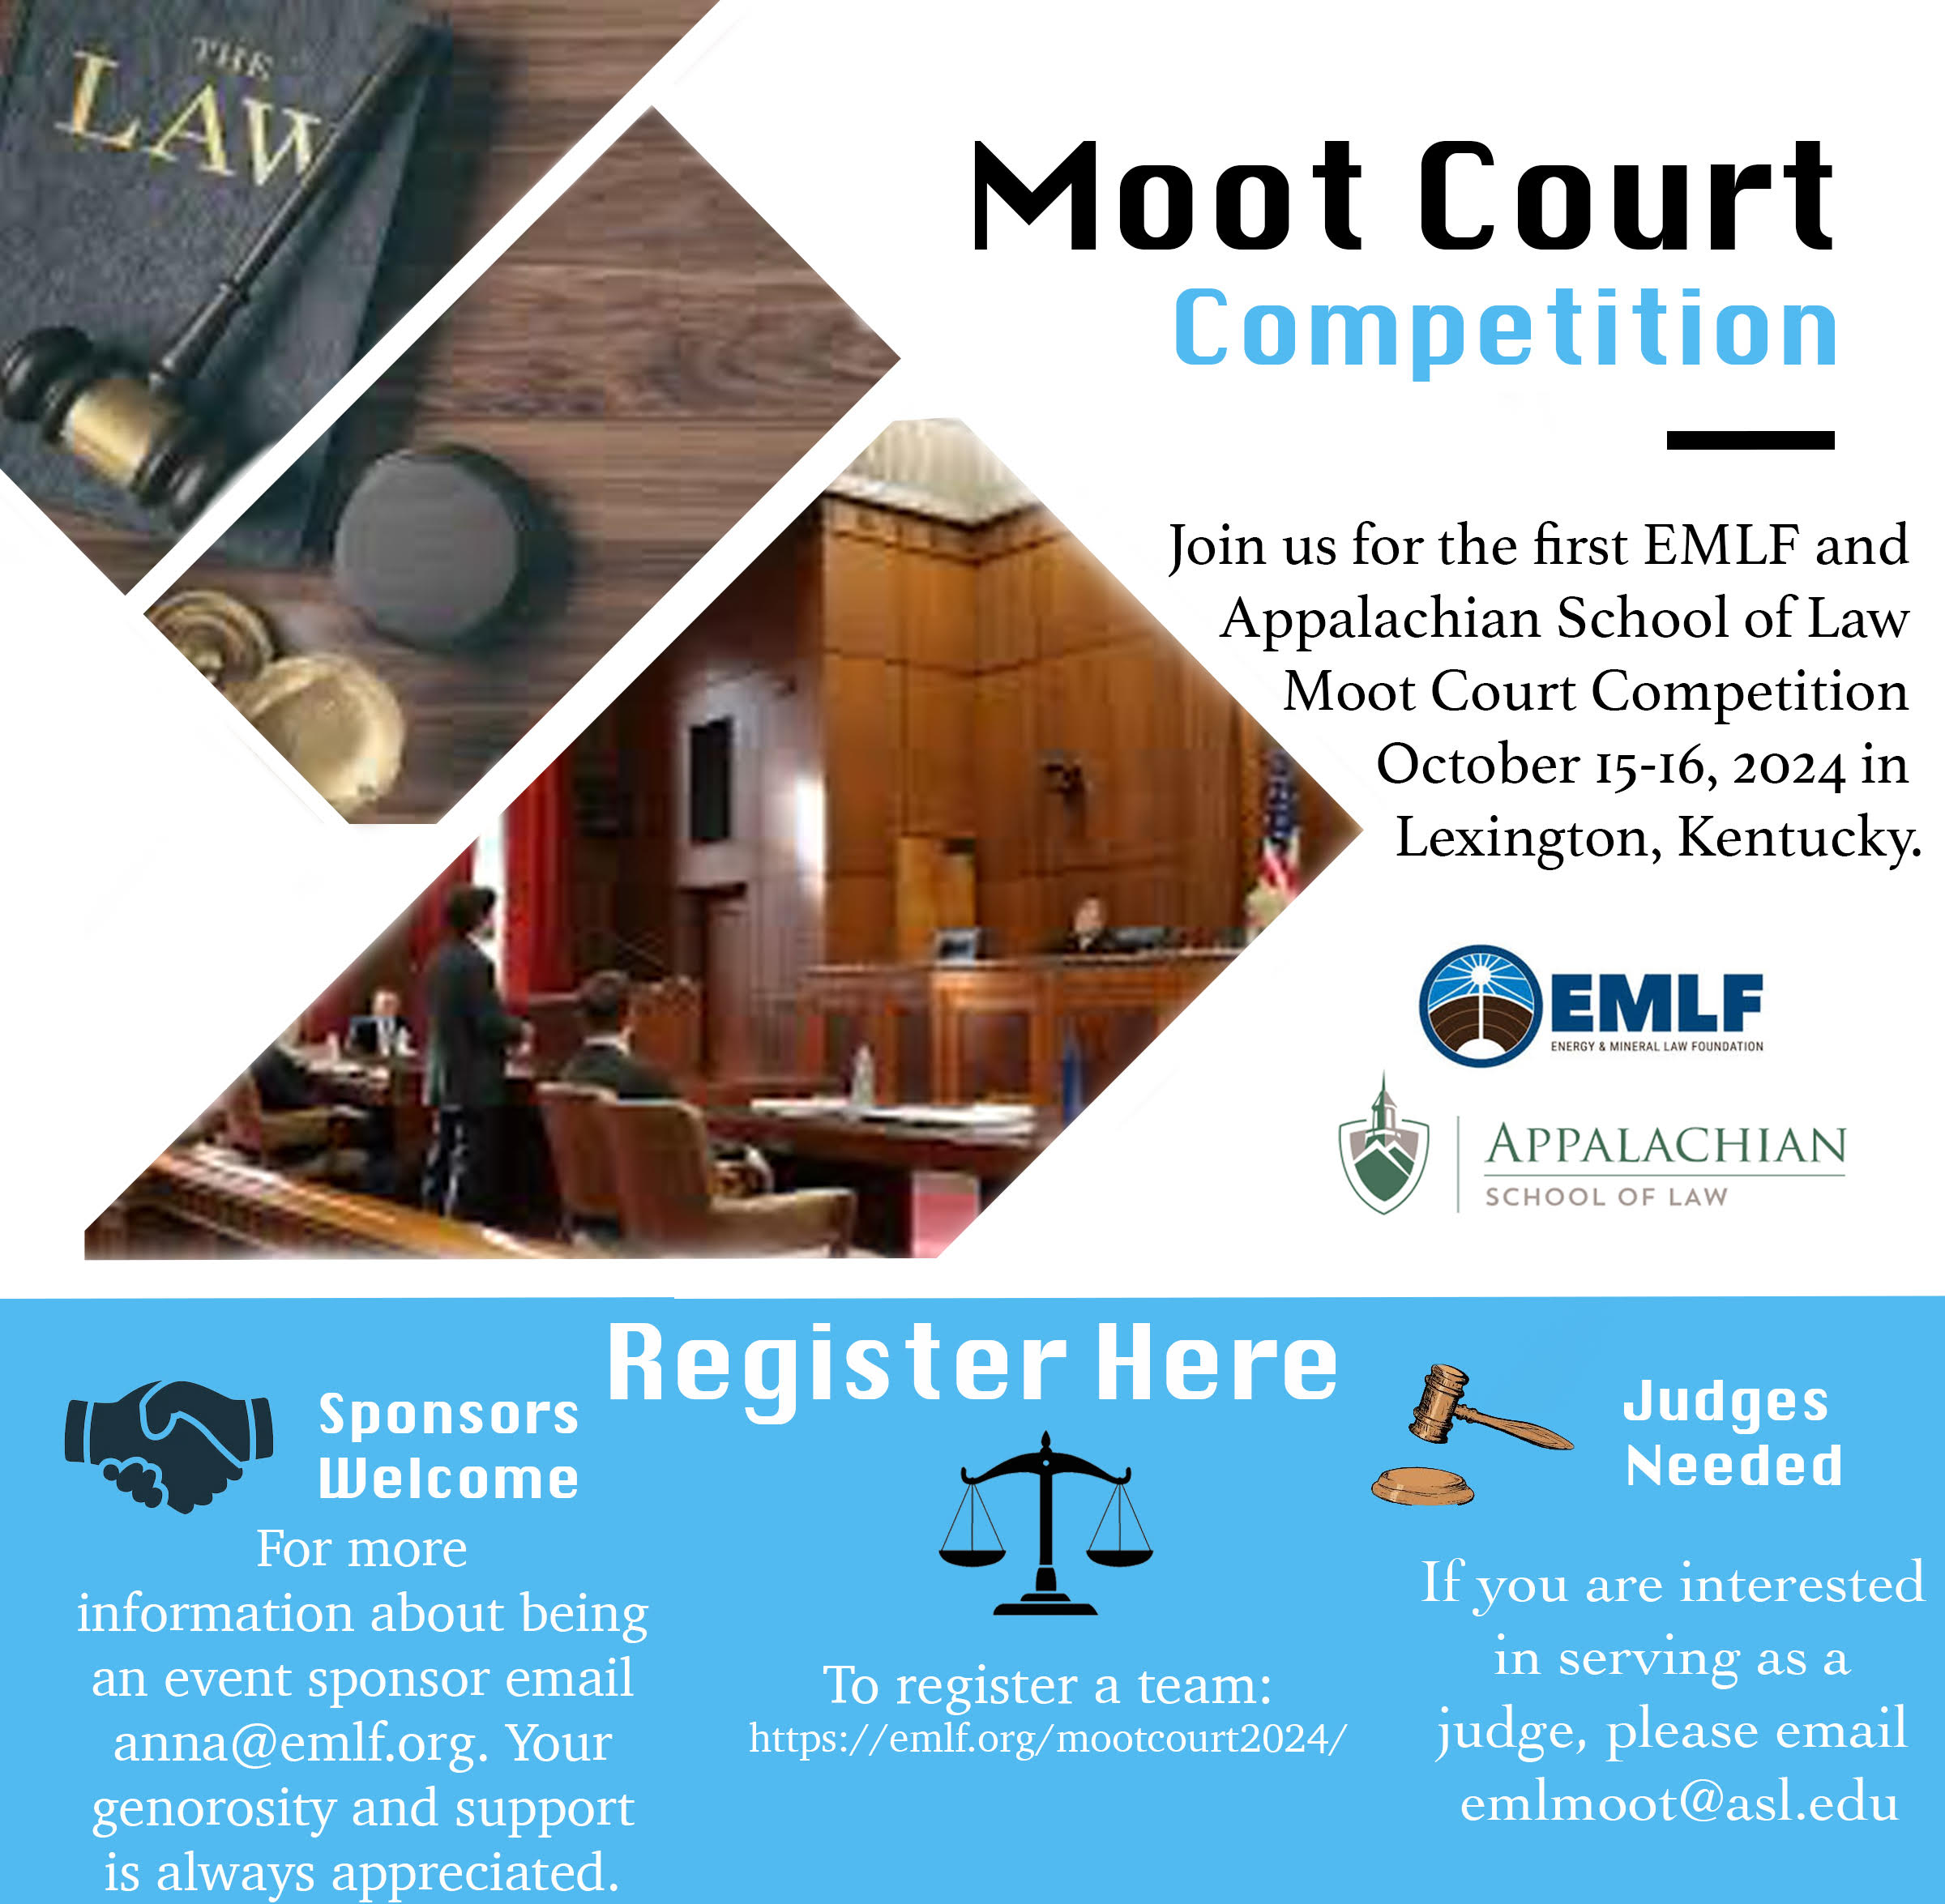 Join us for the first EMLF and Appalachian School of Law Moot Court Competition